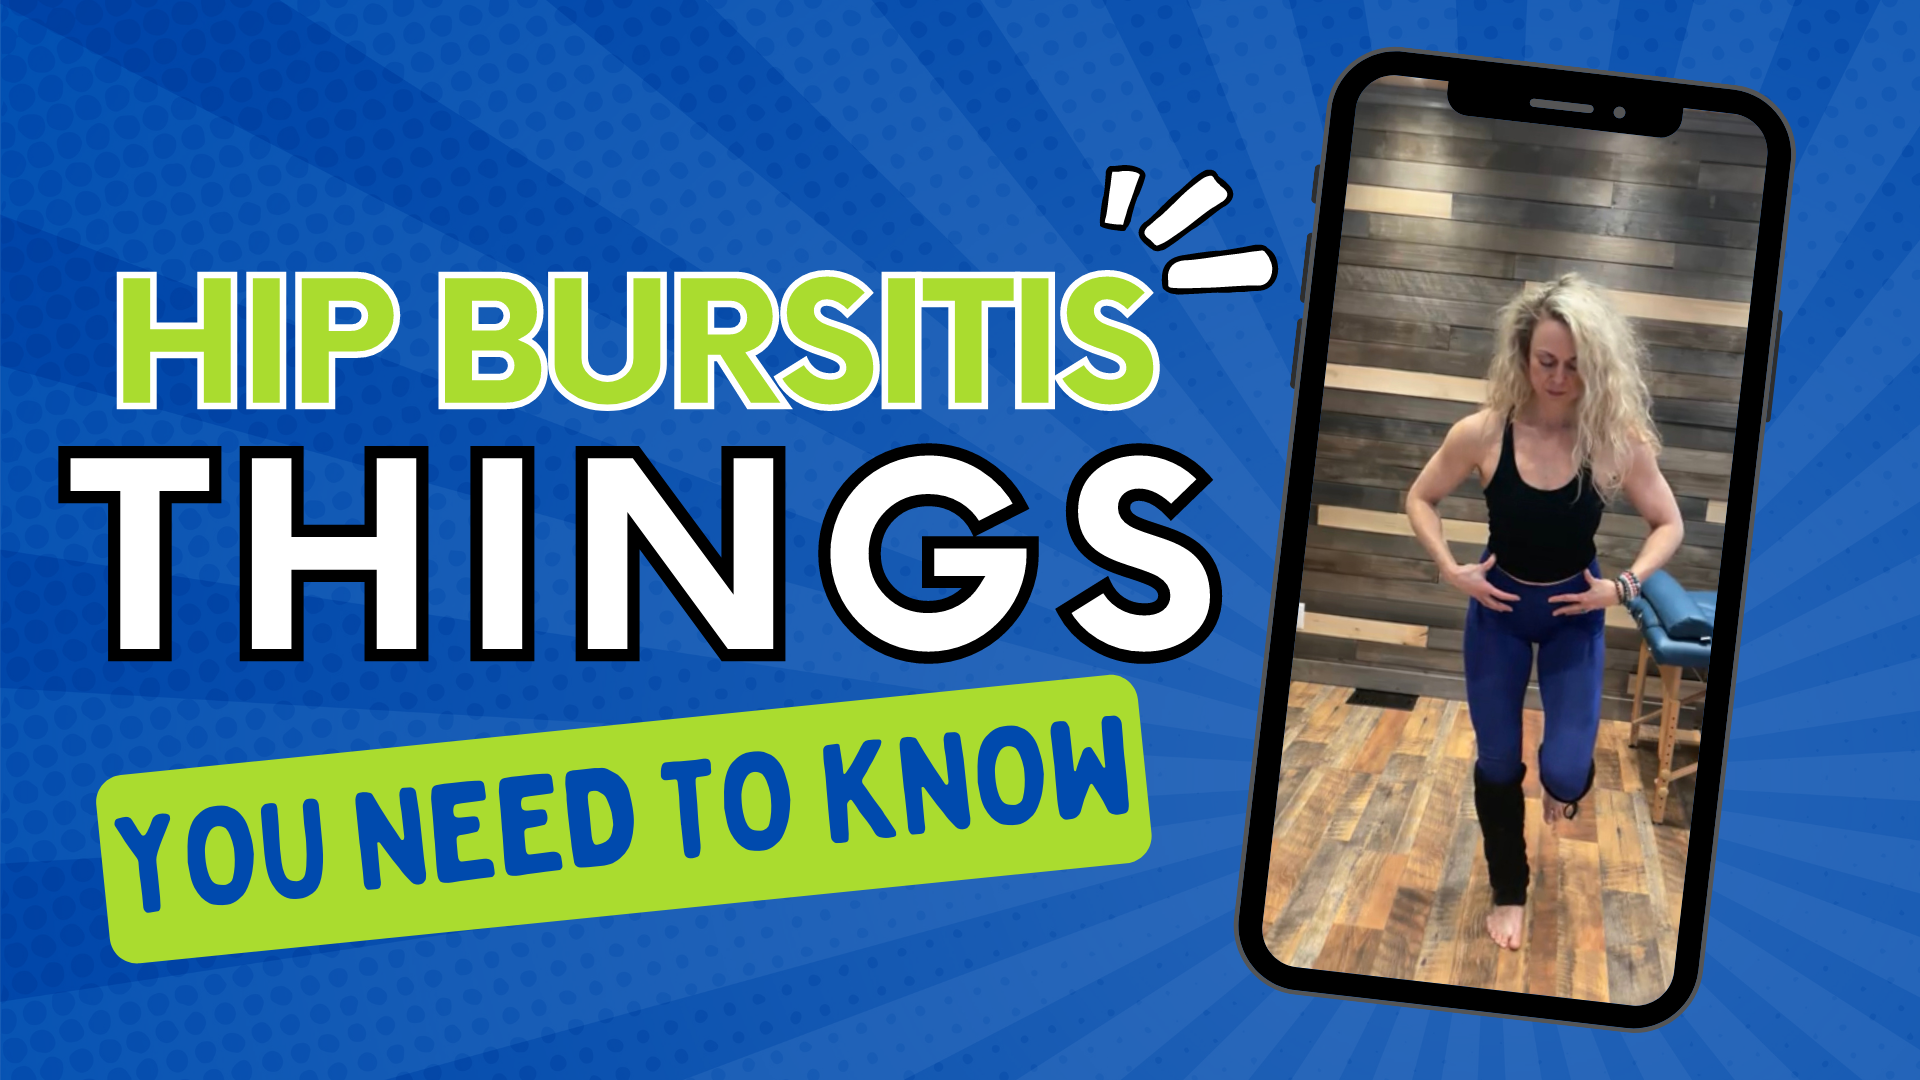 What you need to know about hip bursitis